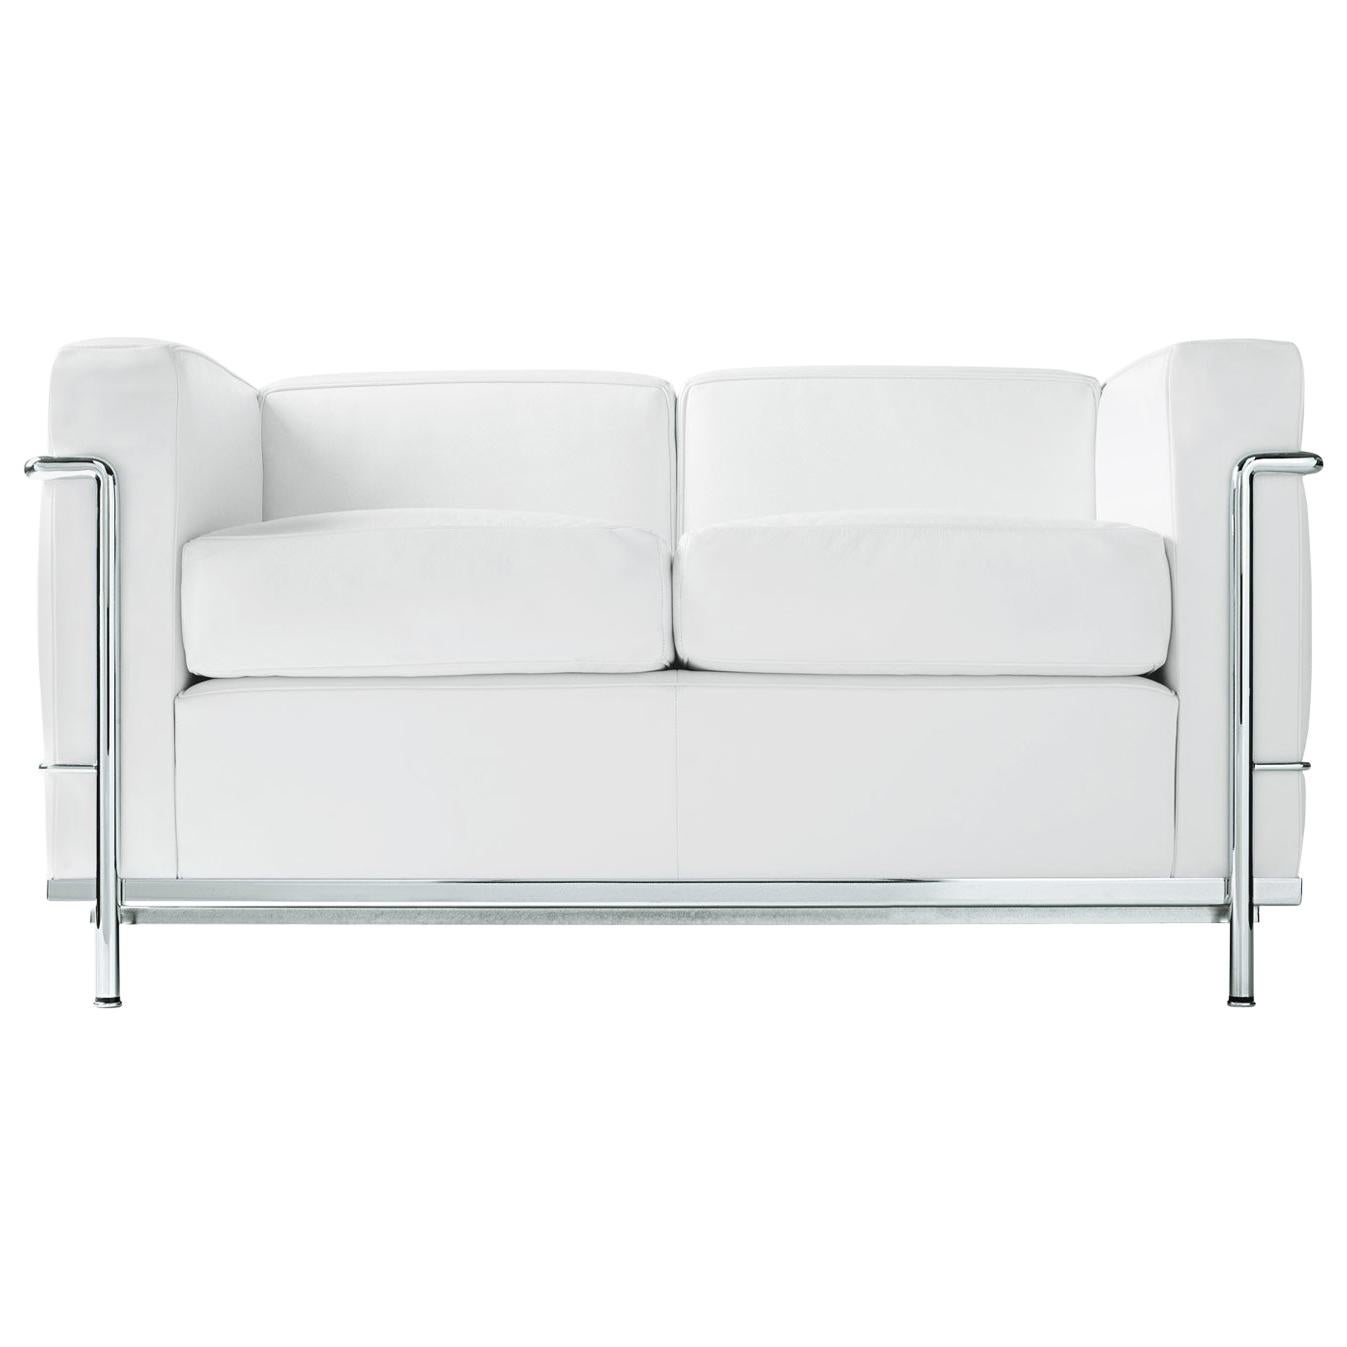 Contemporary Le Corbusier, Pierre Jeanneret, Charlotte Perriand LC2 2-Seat Sofa by Cassina For Sale